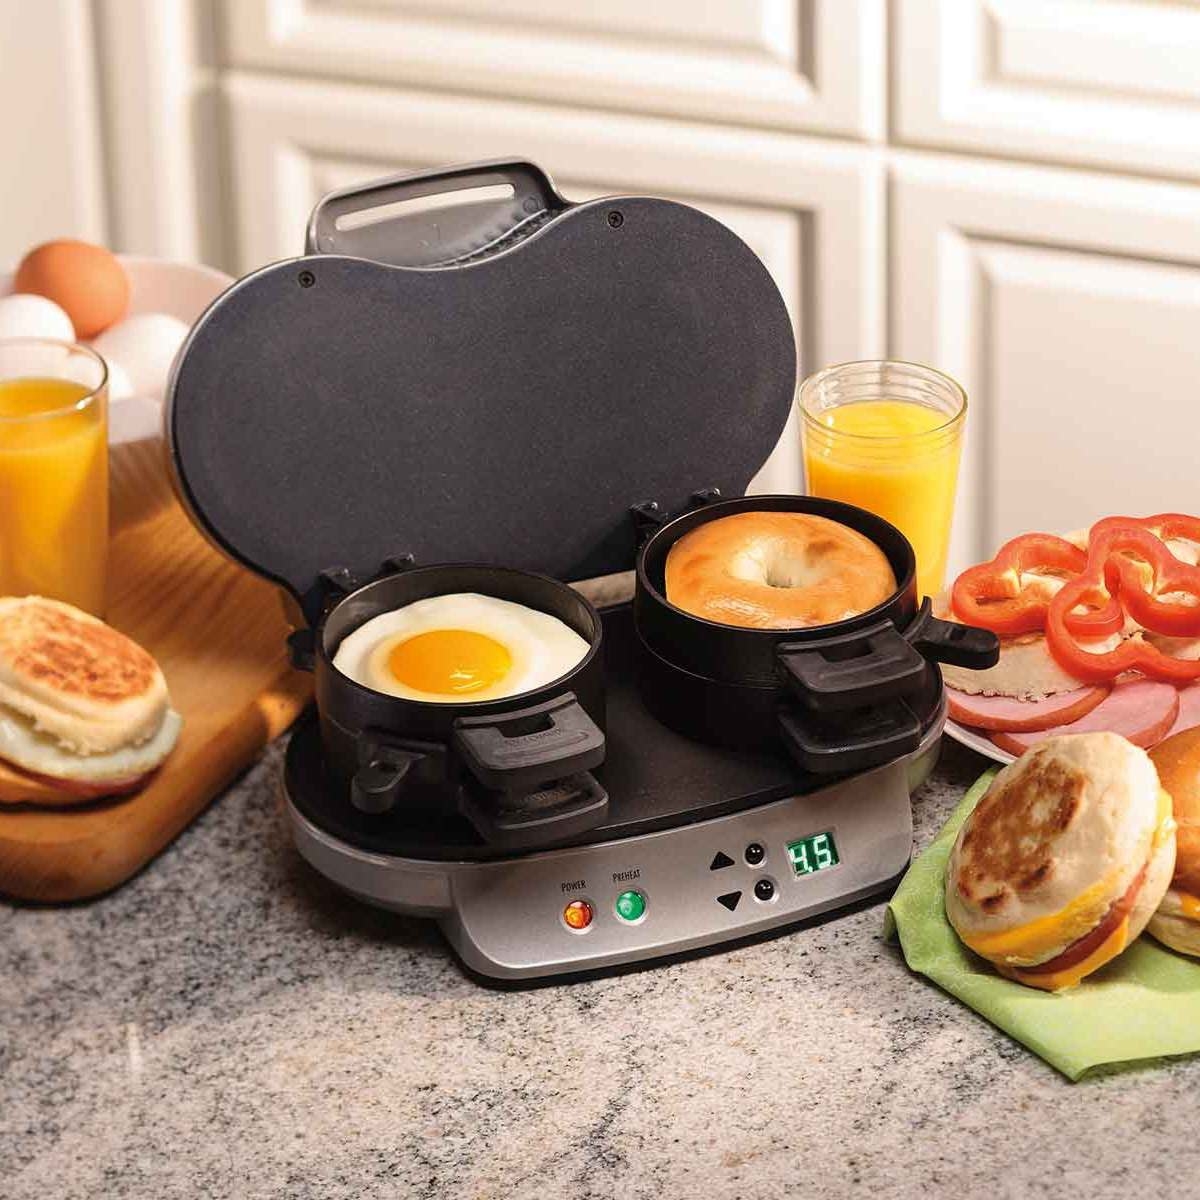 Dual breakfast sandwich maker in silver with egg in the left side, bagel in the right, and other assorted ingredients around it